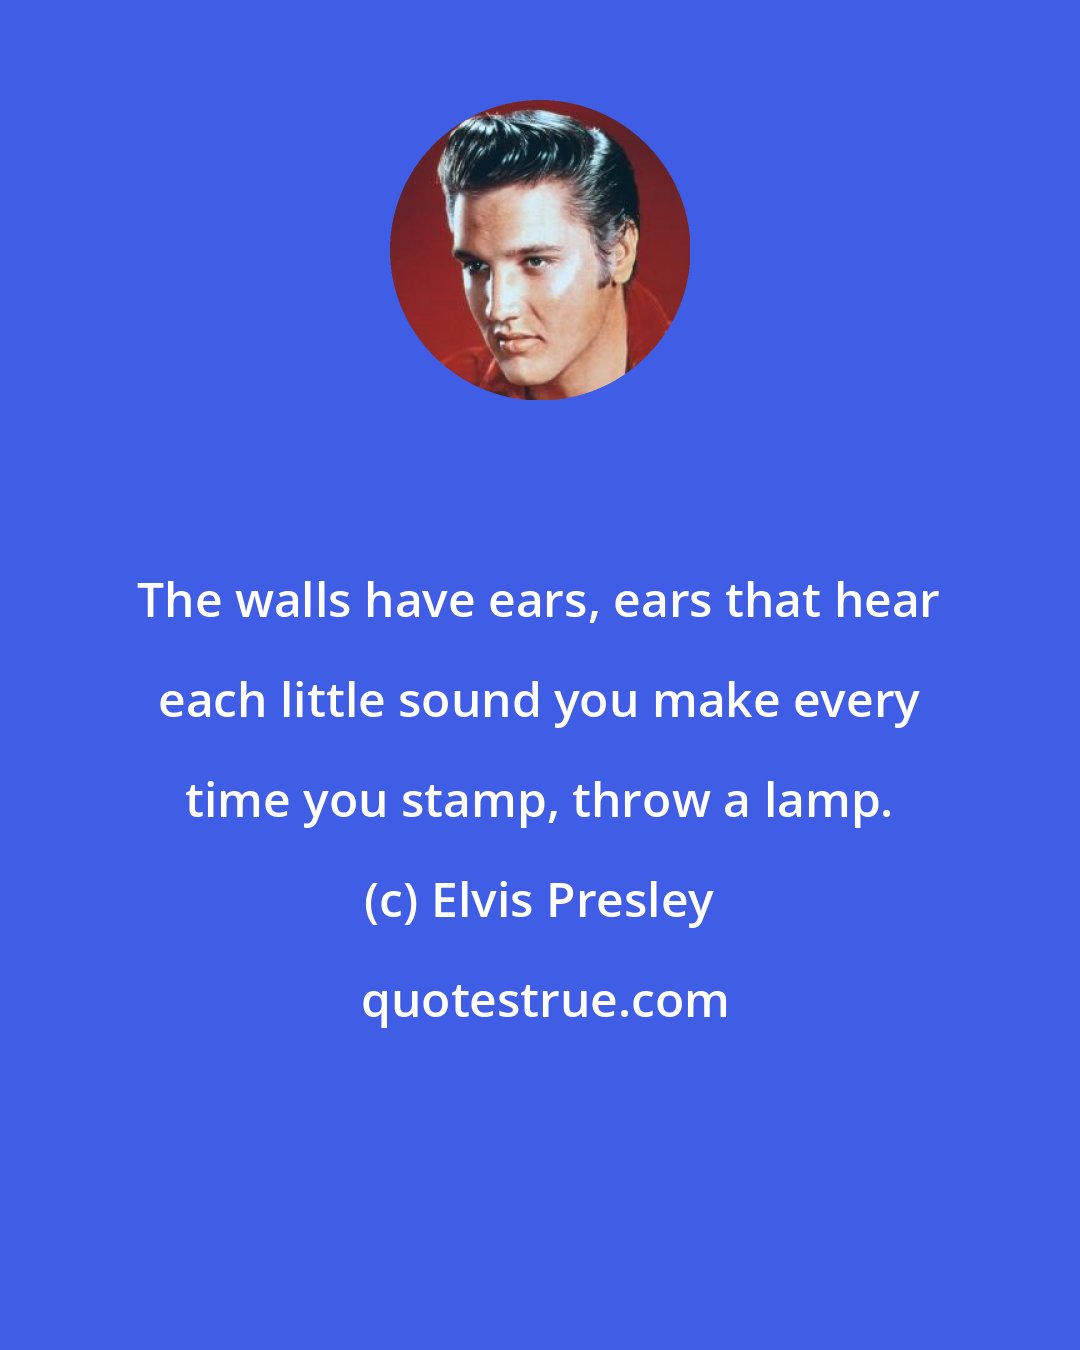 Elvis Presley: The walls have ears, ears that hear each little sound you make every time you stamp, throw a lamp.